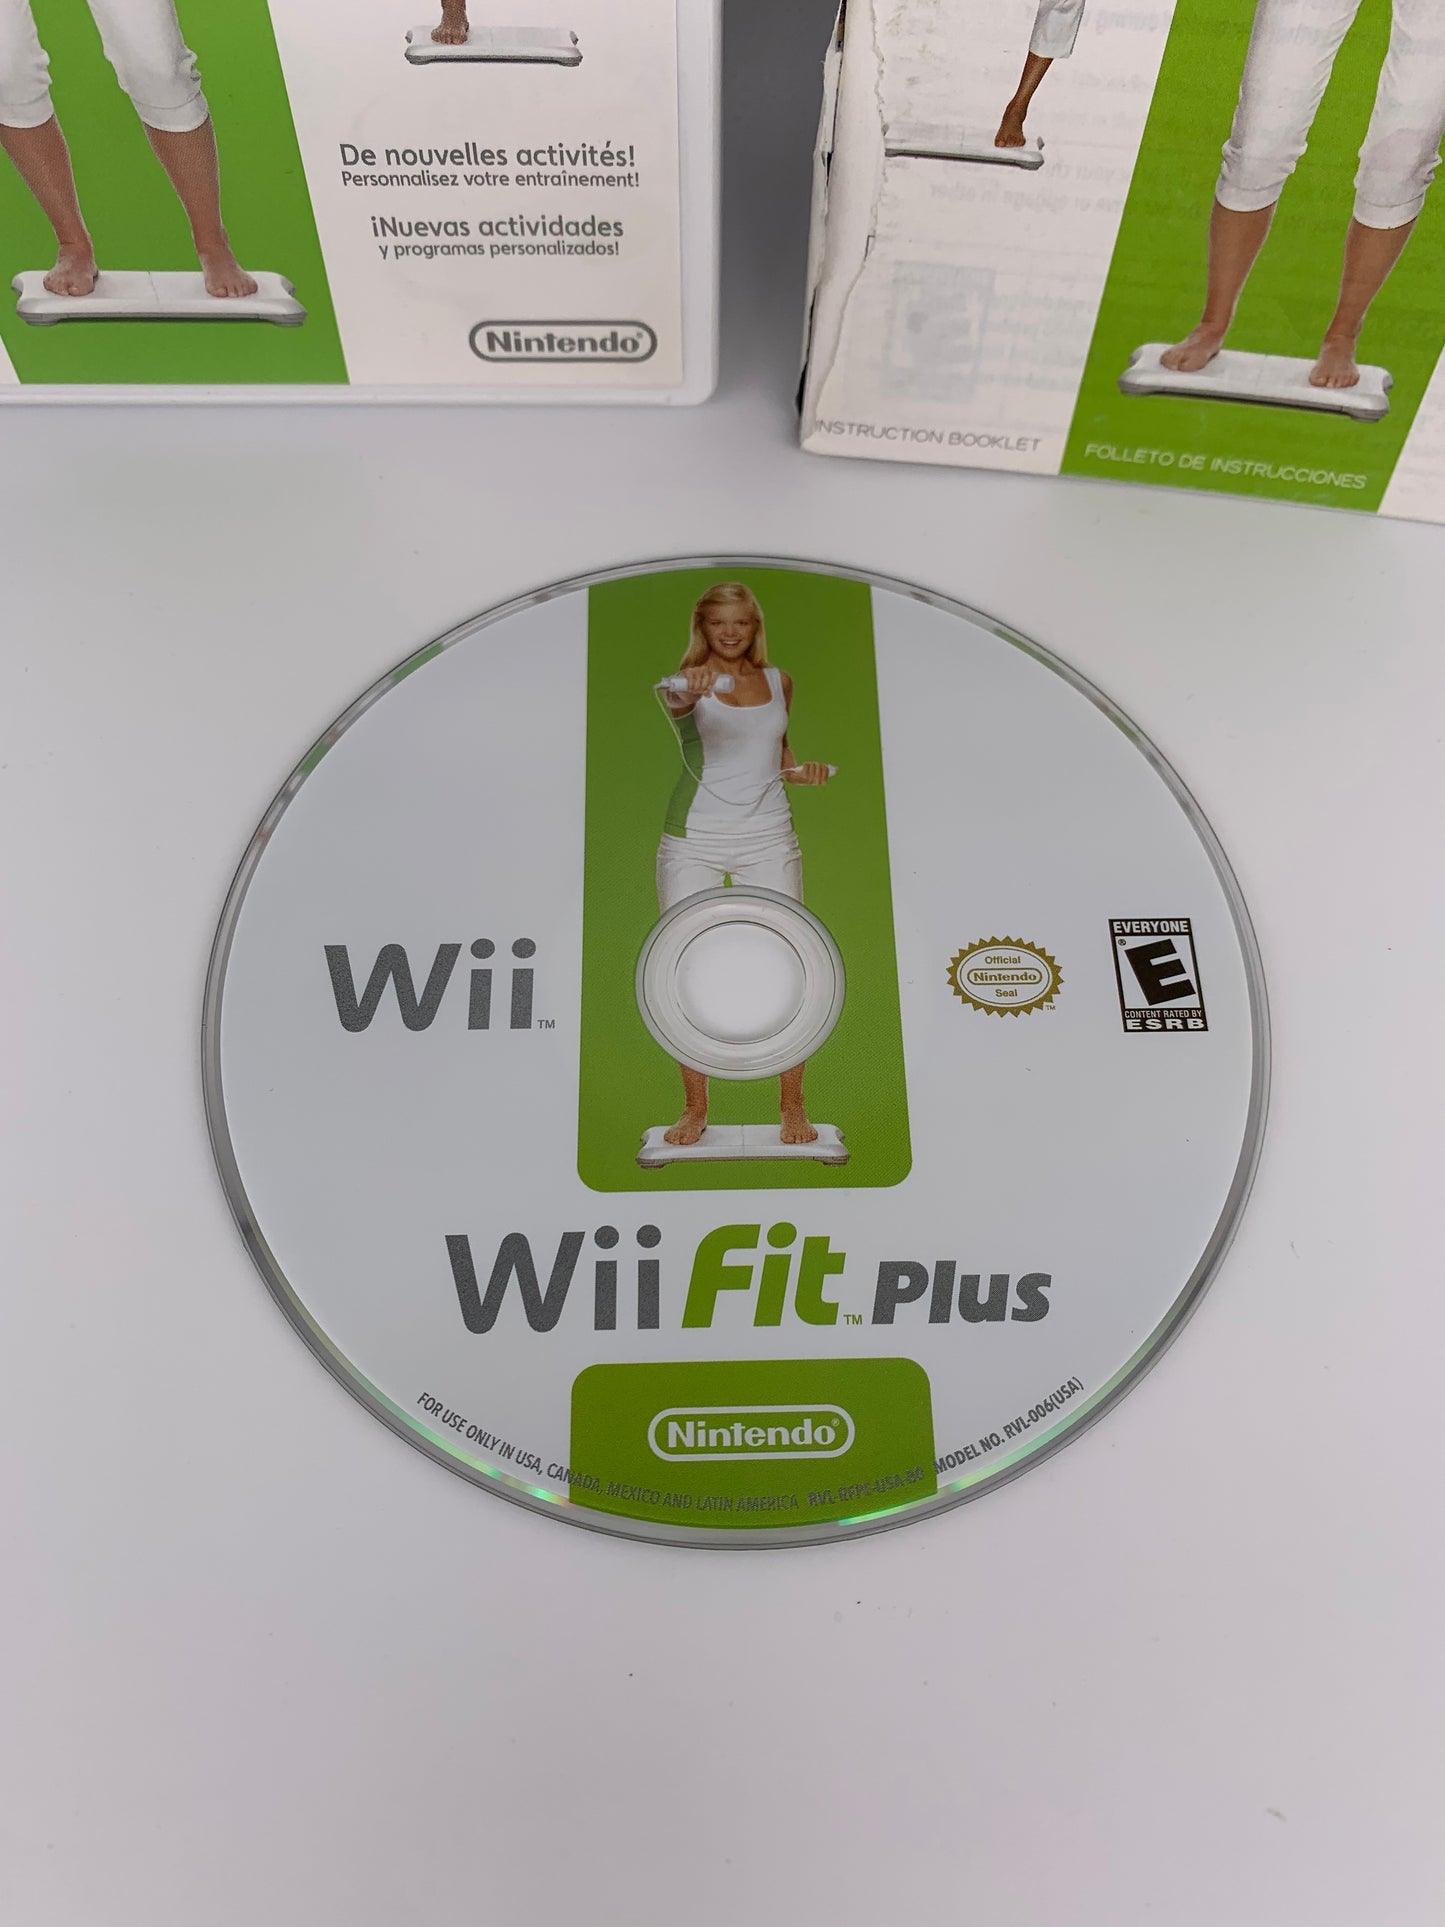 NiNTENDO Wii | Wii FiT PLUS | NOT FOR RESALE